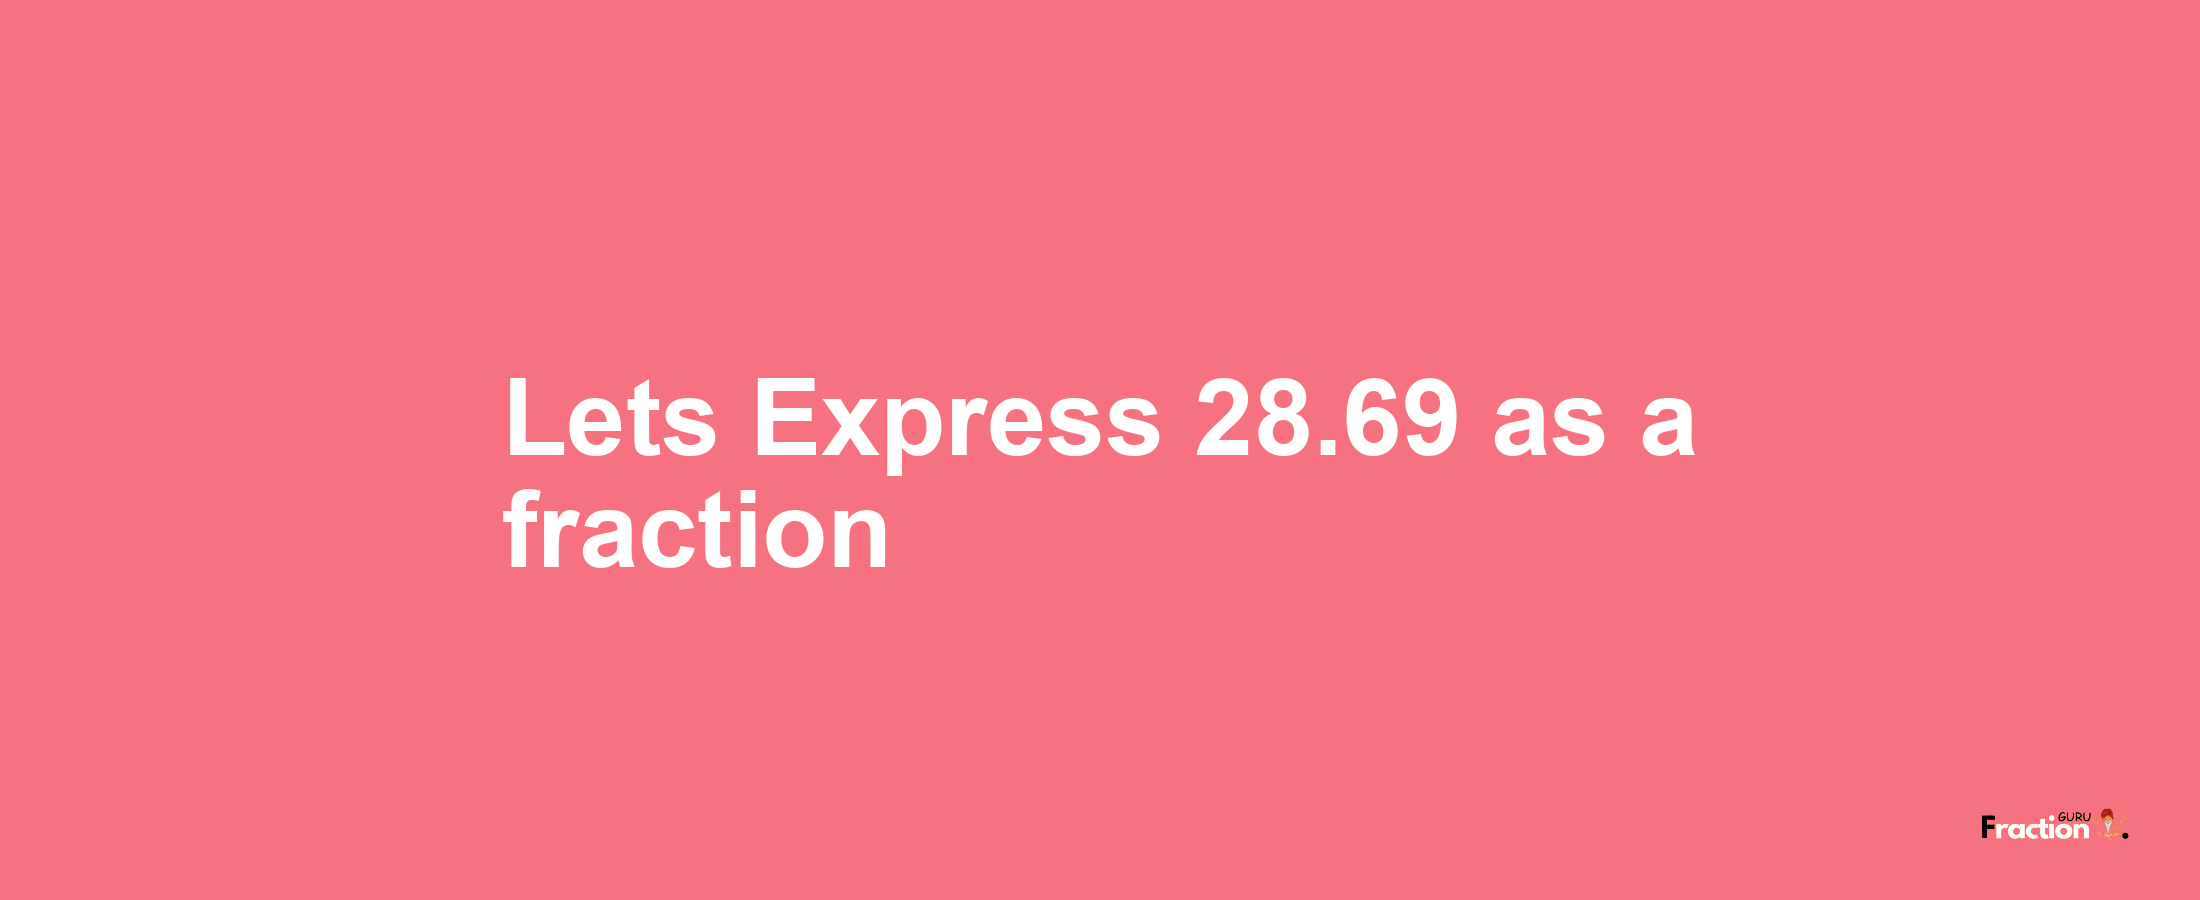 Lets Express 28.69 as afraction